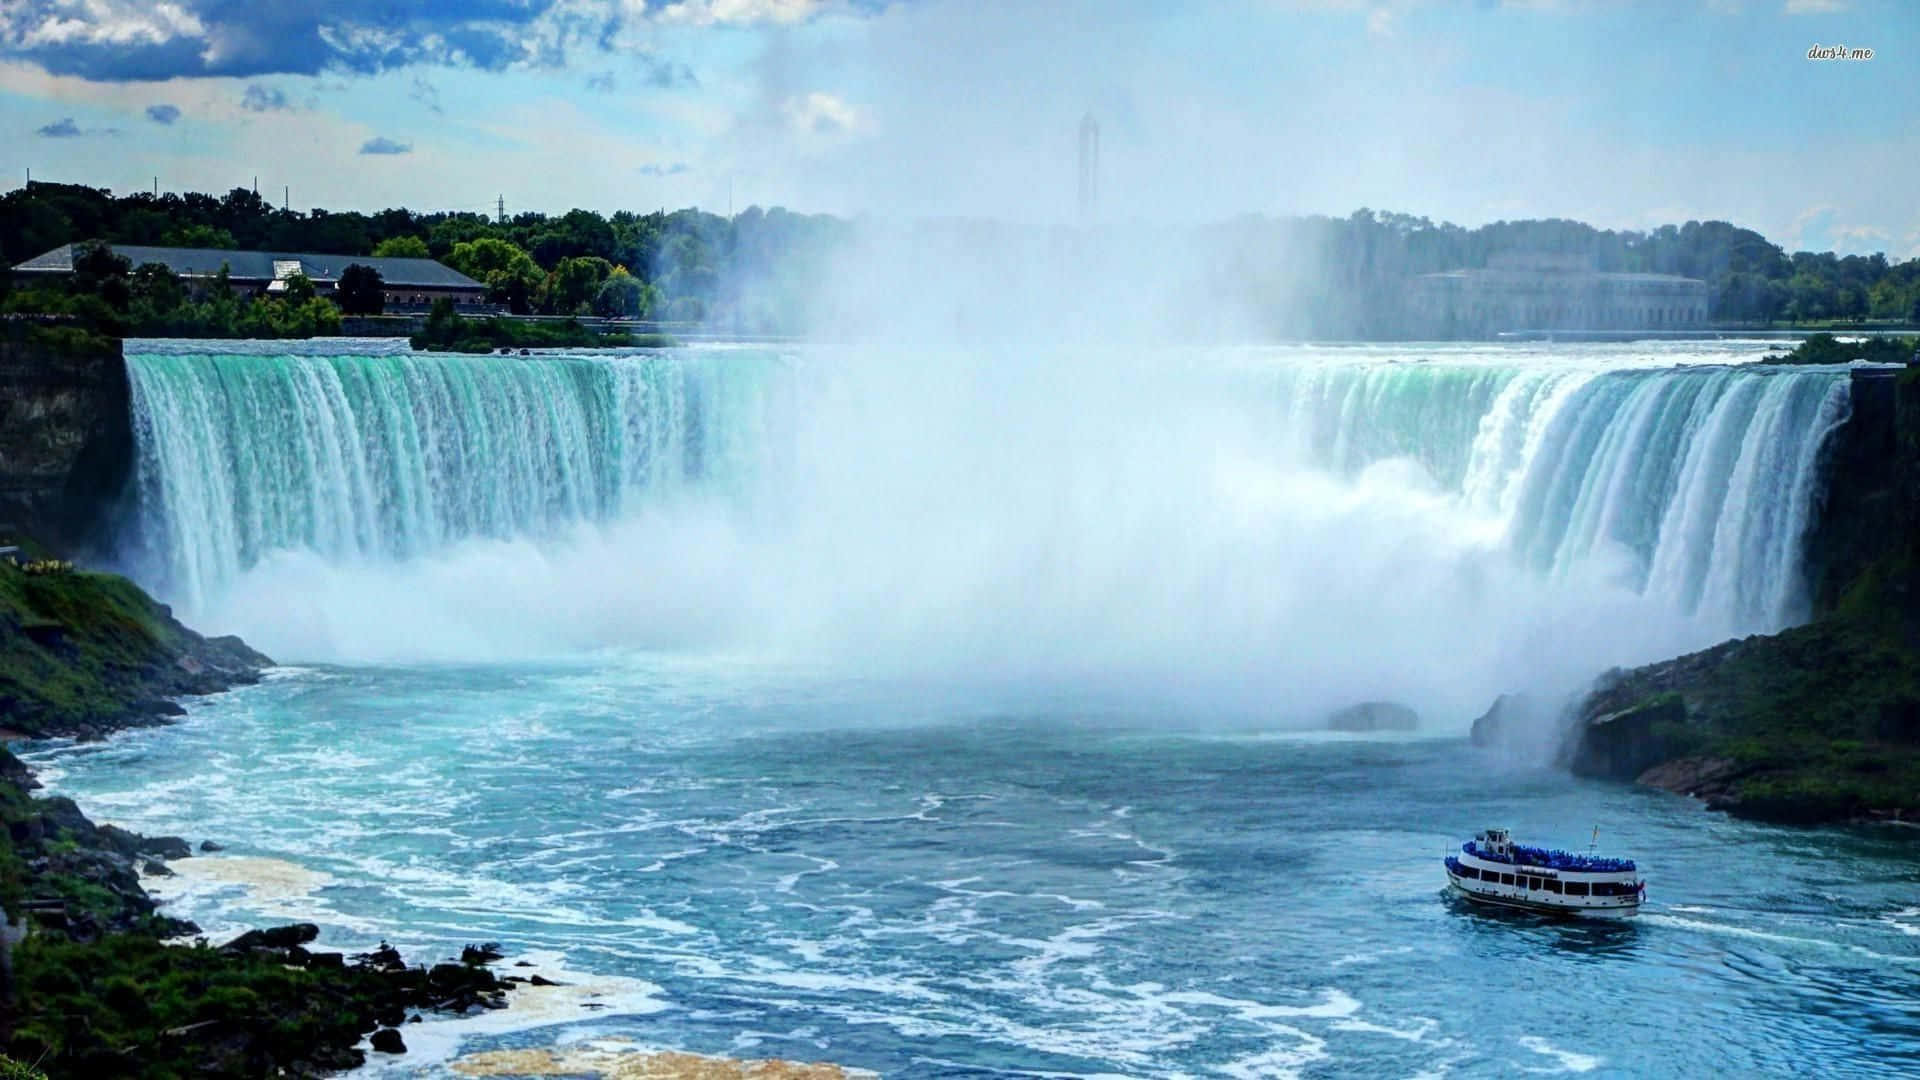 Skickaöver Horseshoe Niagara Falls Kanada. (this Sentence Does Not Make Sense In The Context Of Computer Or Mobile Wallpaper. Can You Provide More Specific Phrases Or Instructions Related To Wallpaper?) Wallpaper